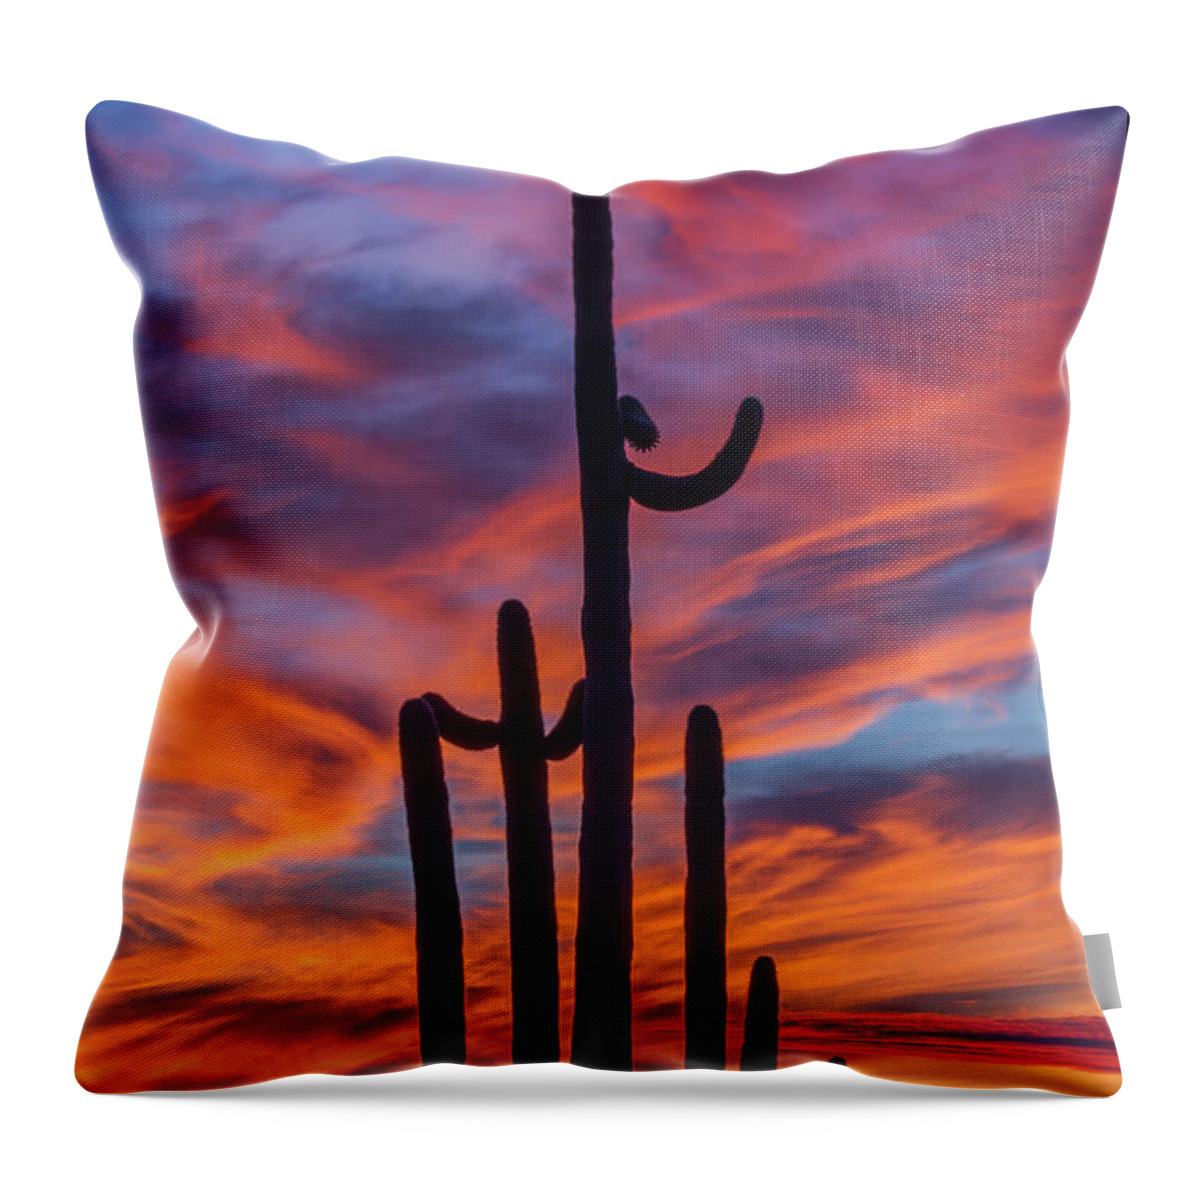 Twilight Throw Pillow featuring the photograph Twilight Fire by Gary Migues